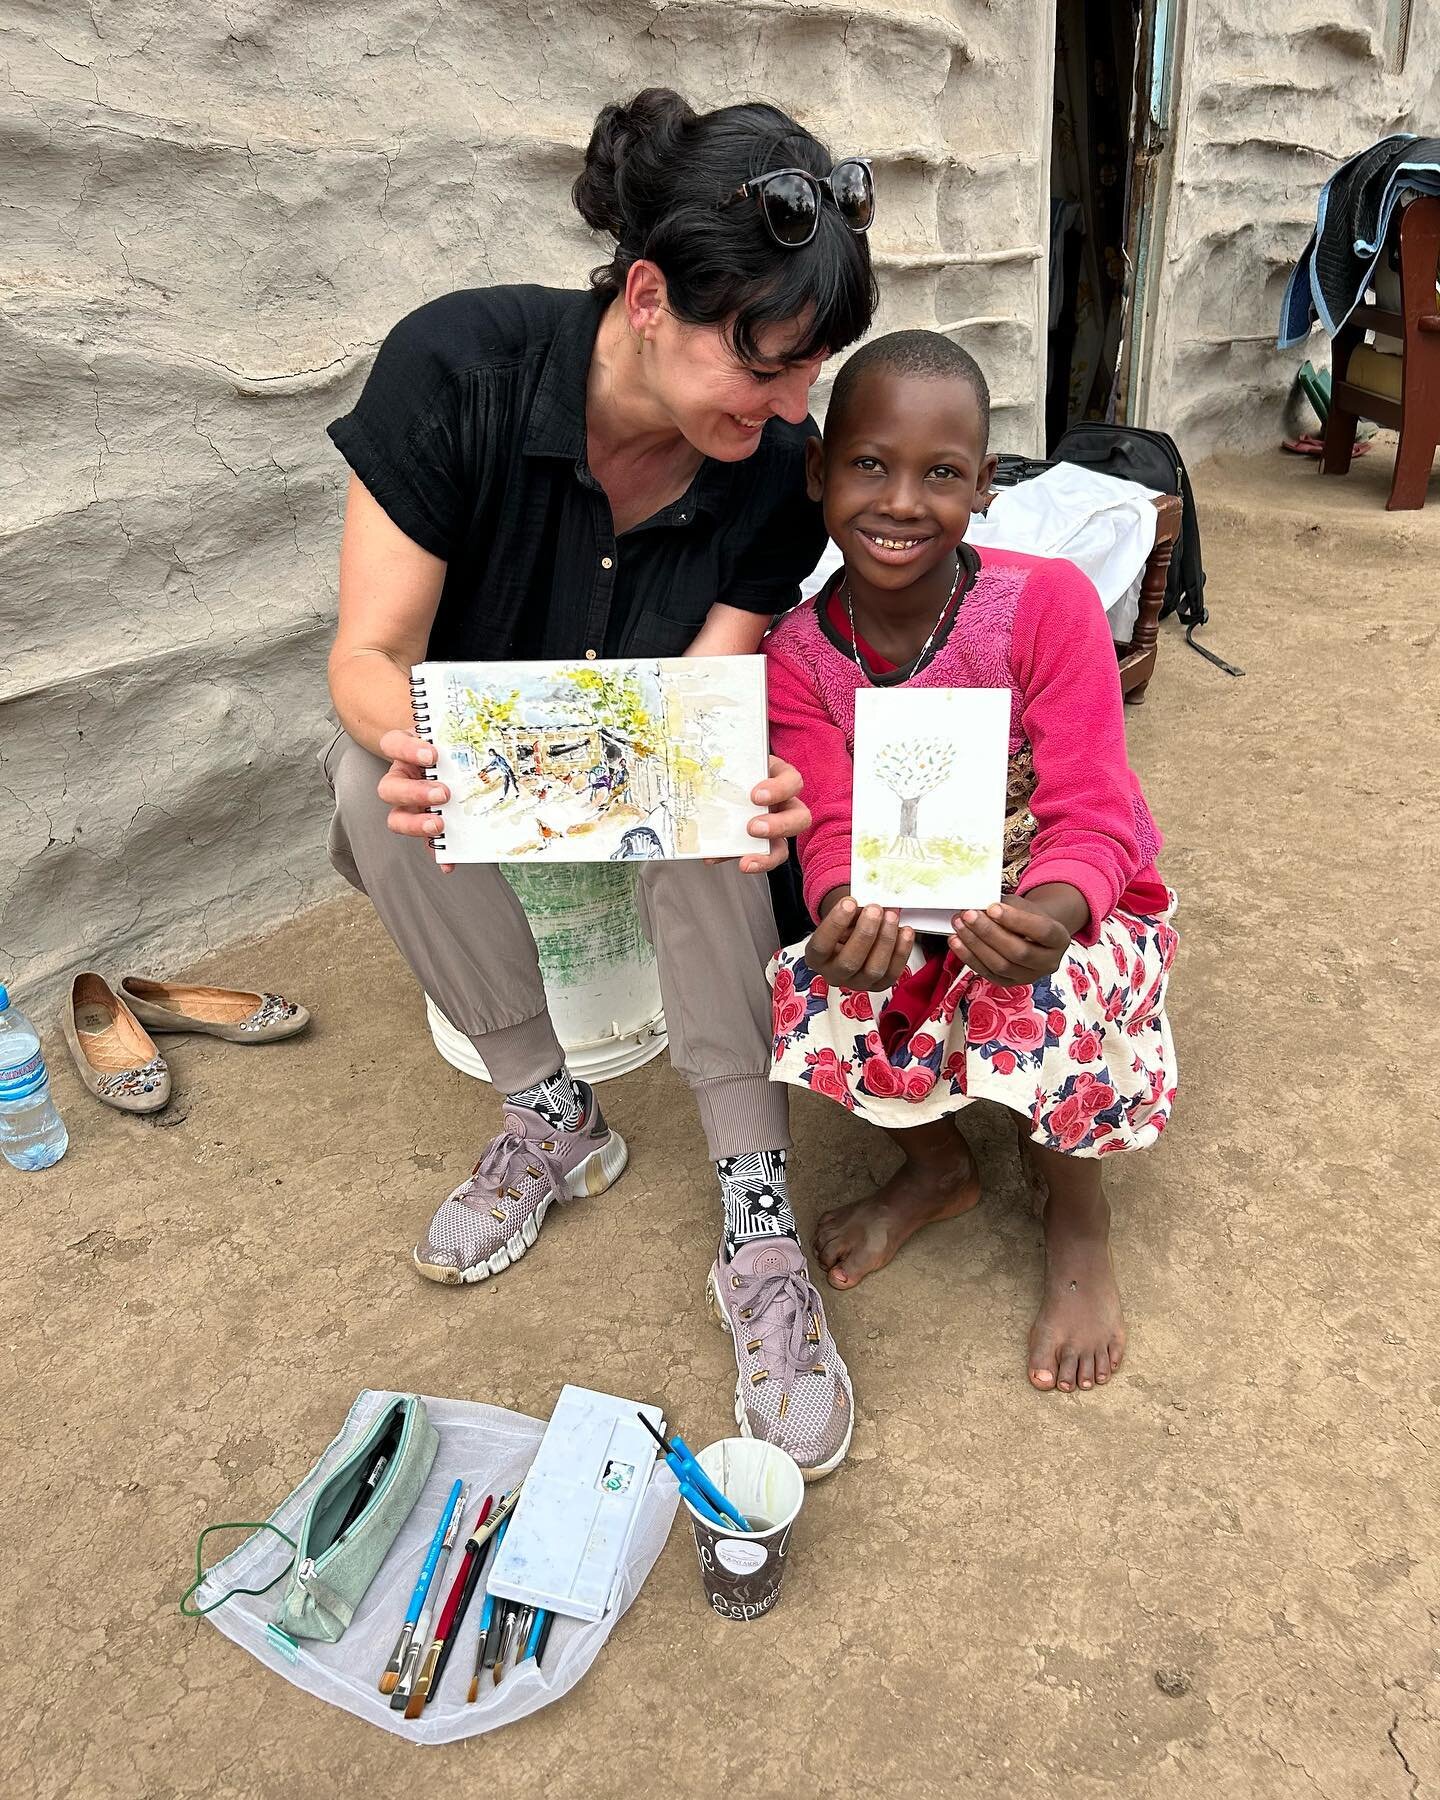 Last week I was in Tanzania helping out with a video shoot for @worldvisionusa, and squeezed in some art time with Faith at her home while the rest of the team interviewed her parents, Grace and Pastor Raymond. Yay! Sketching and painting on location